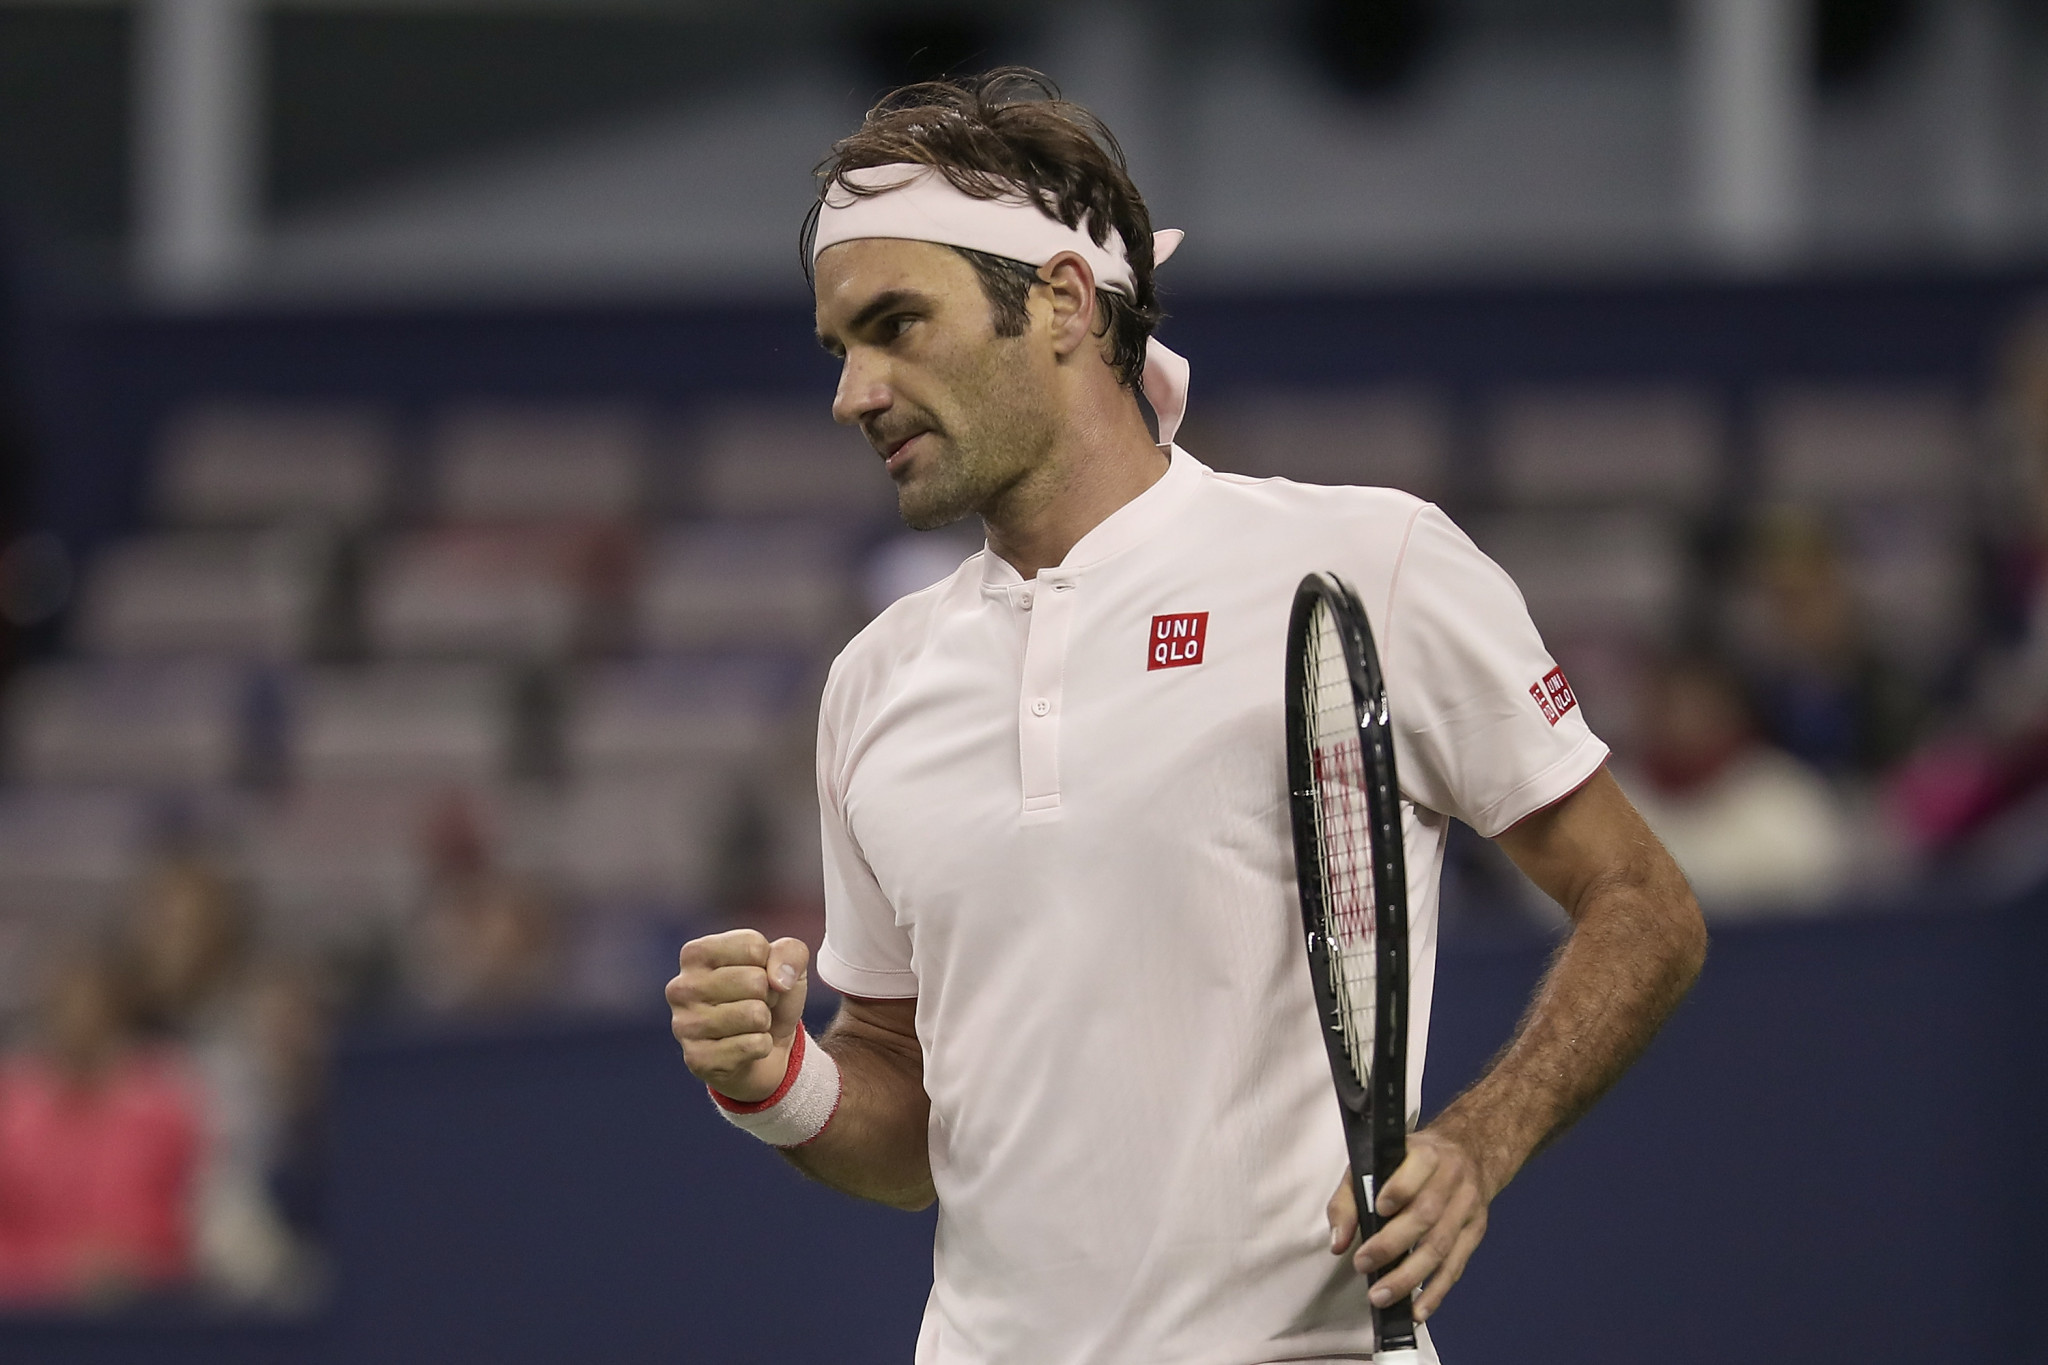 Roger Federer looks in the form to defend his title at the ATP Shanghai Masters ©Getty Images